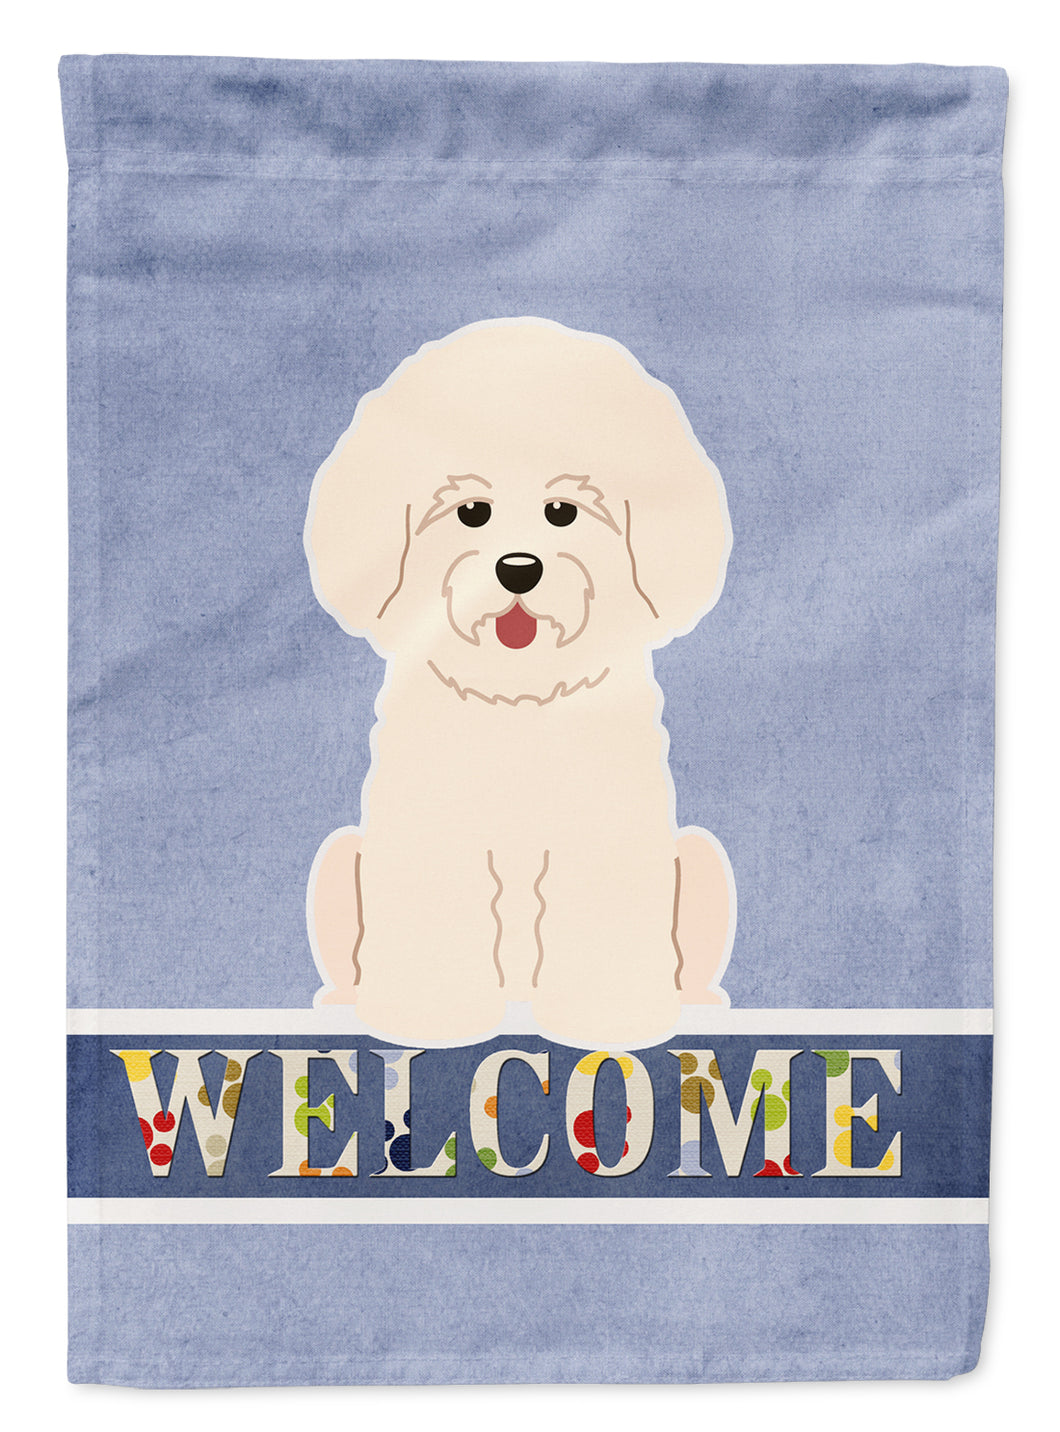 Bichon Frise Welcome Garden Flag 2-Sided 2-Ply